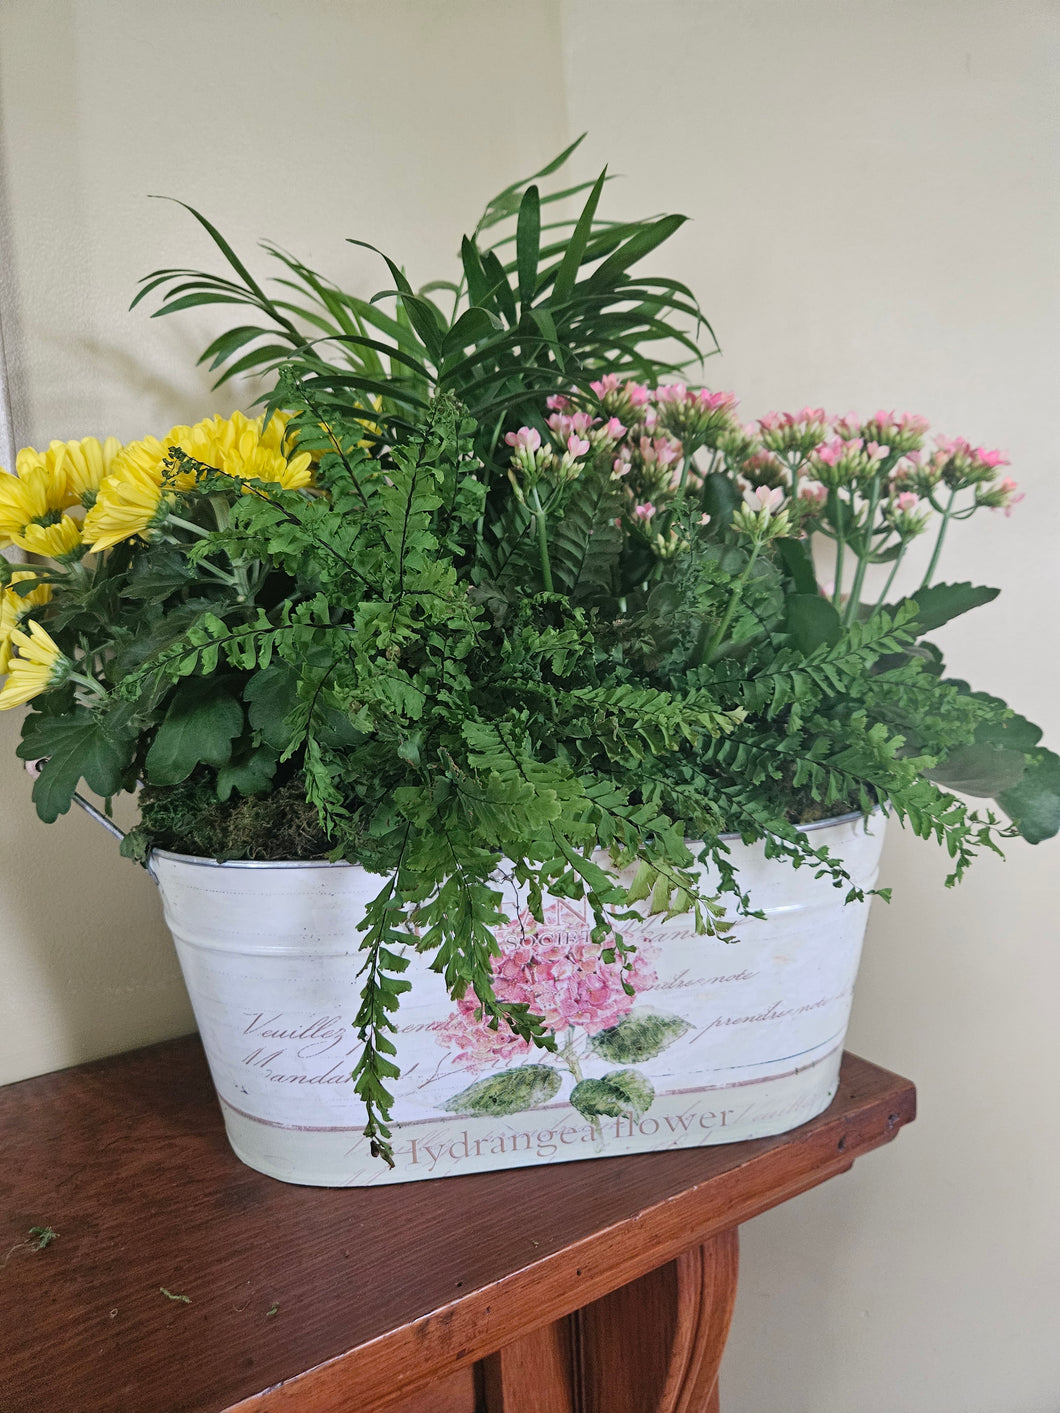 Oblong Hydrangea Container with Kalanchoe & Daisies